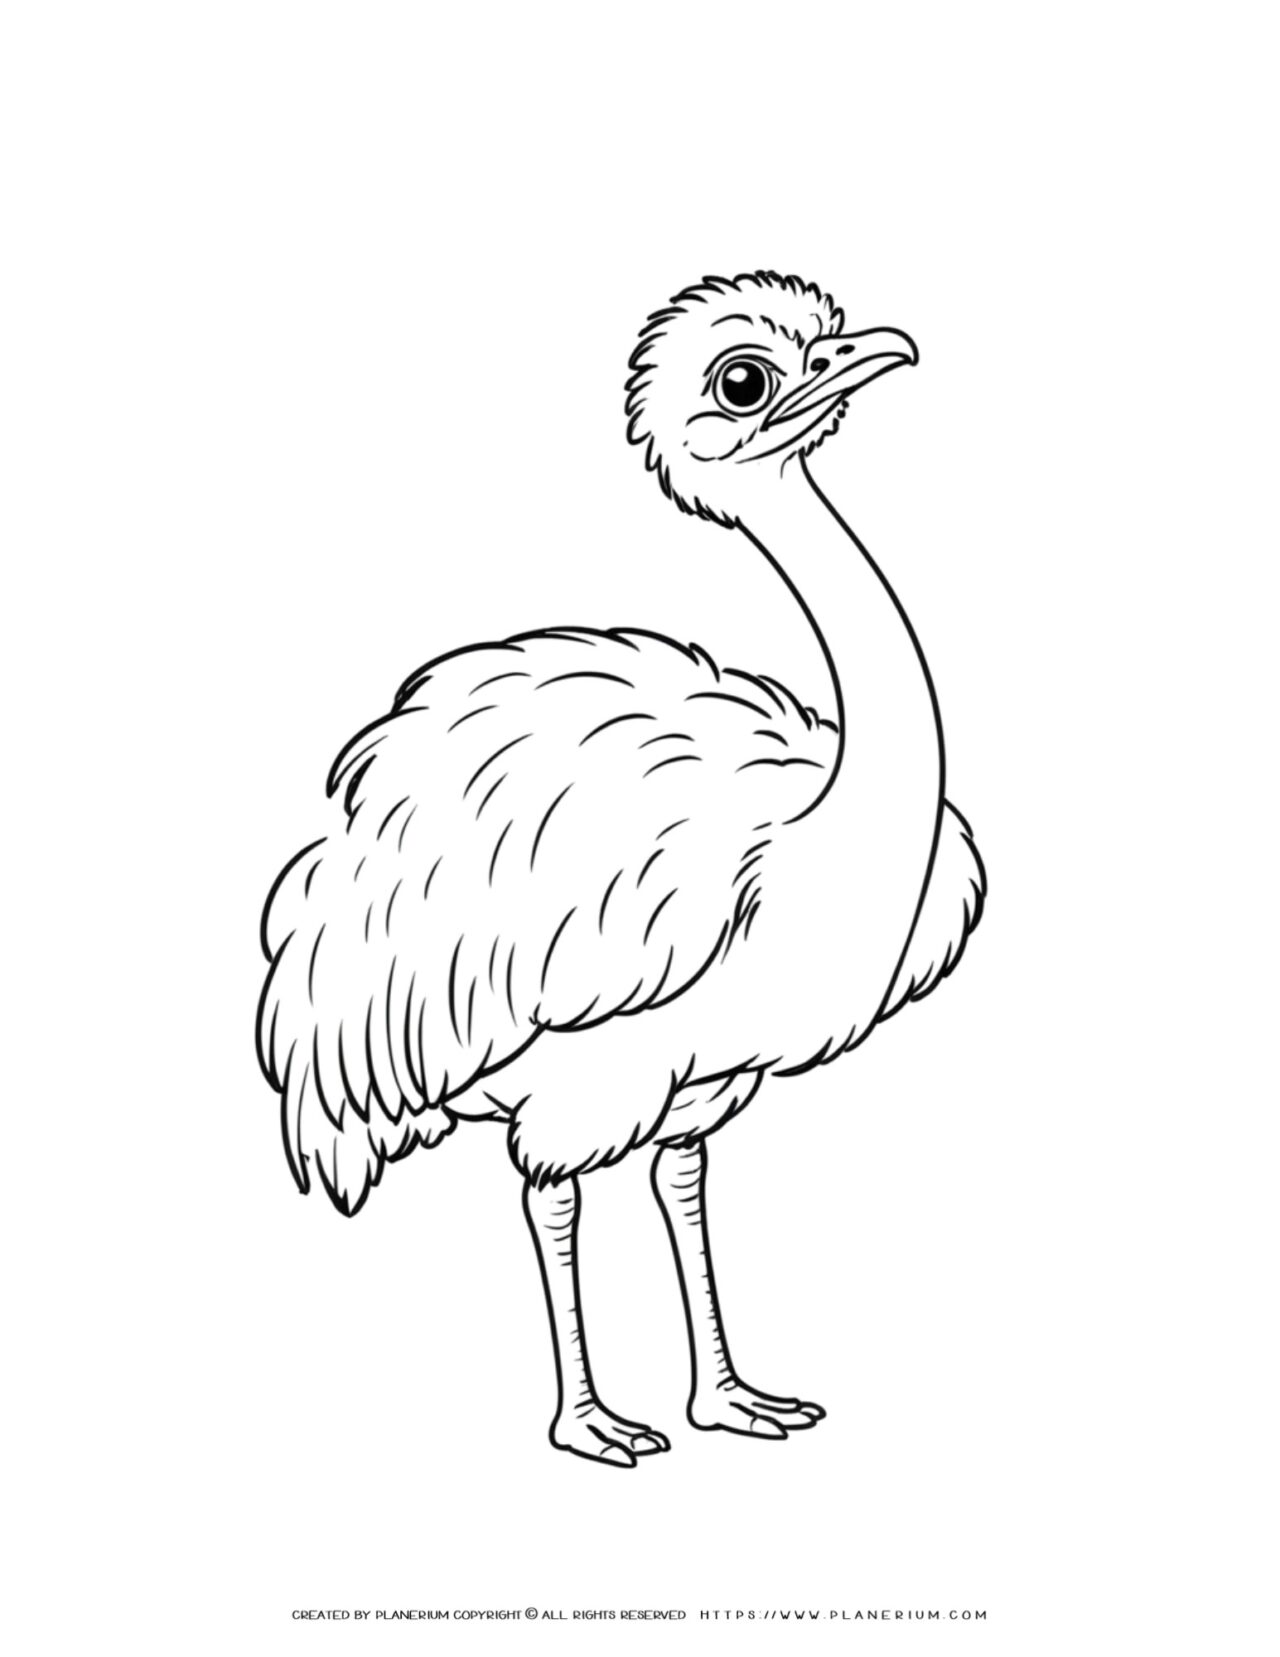 ostrich-illustration-comic-style-coloring-page-for-kids